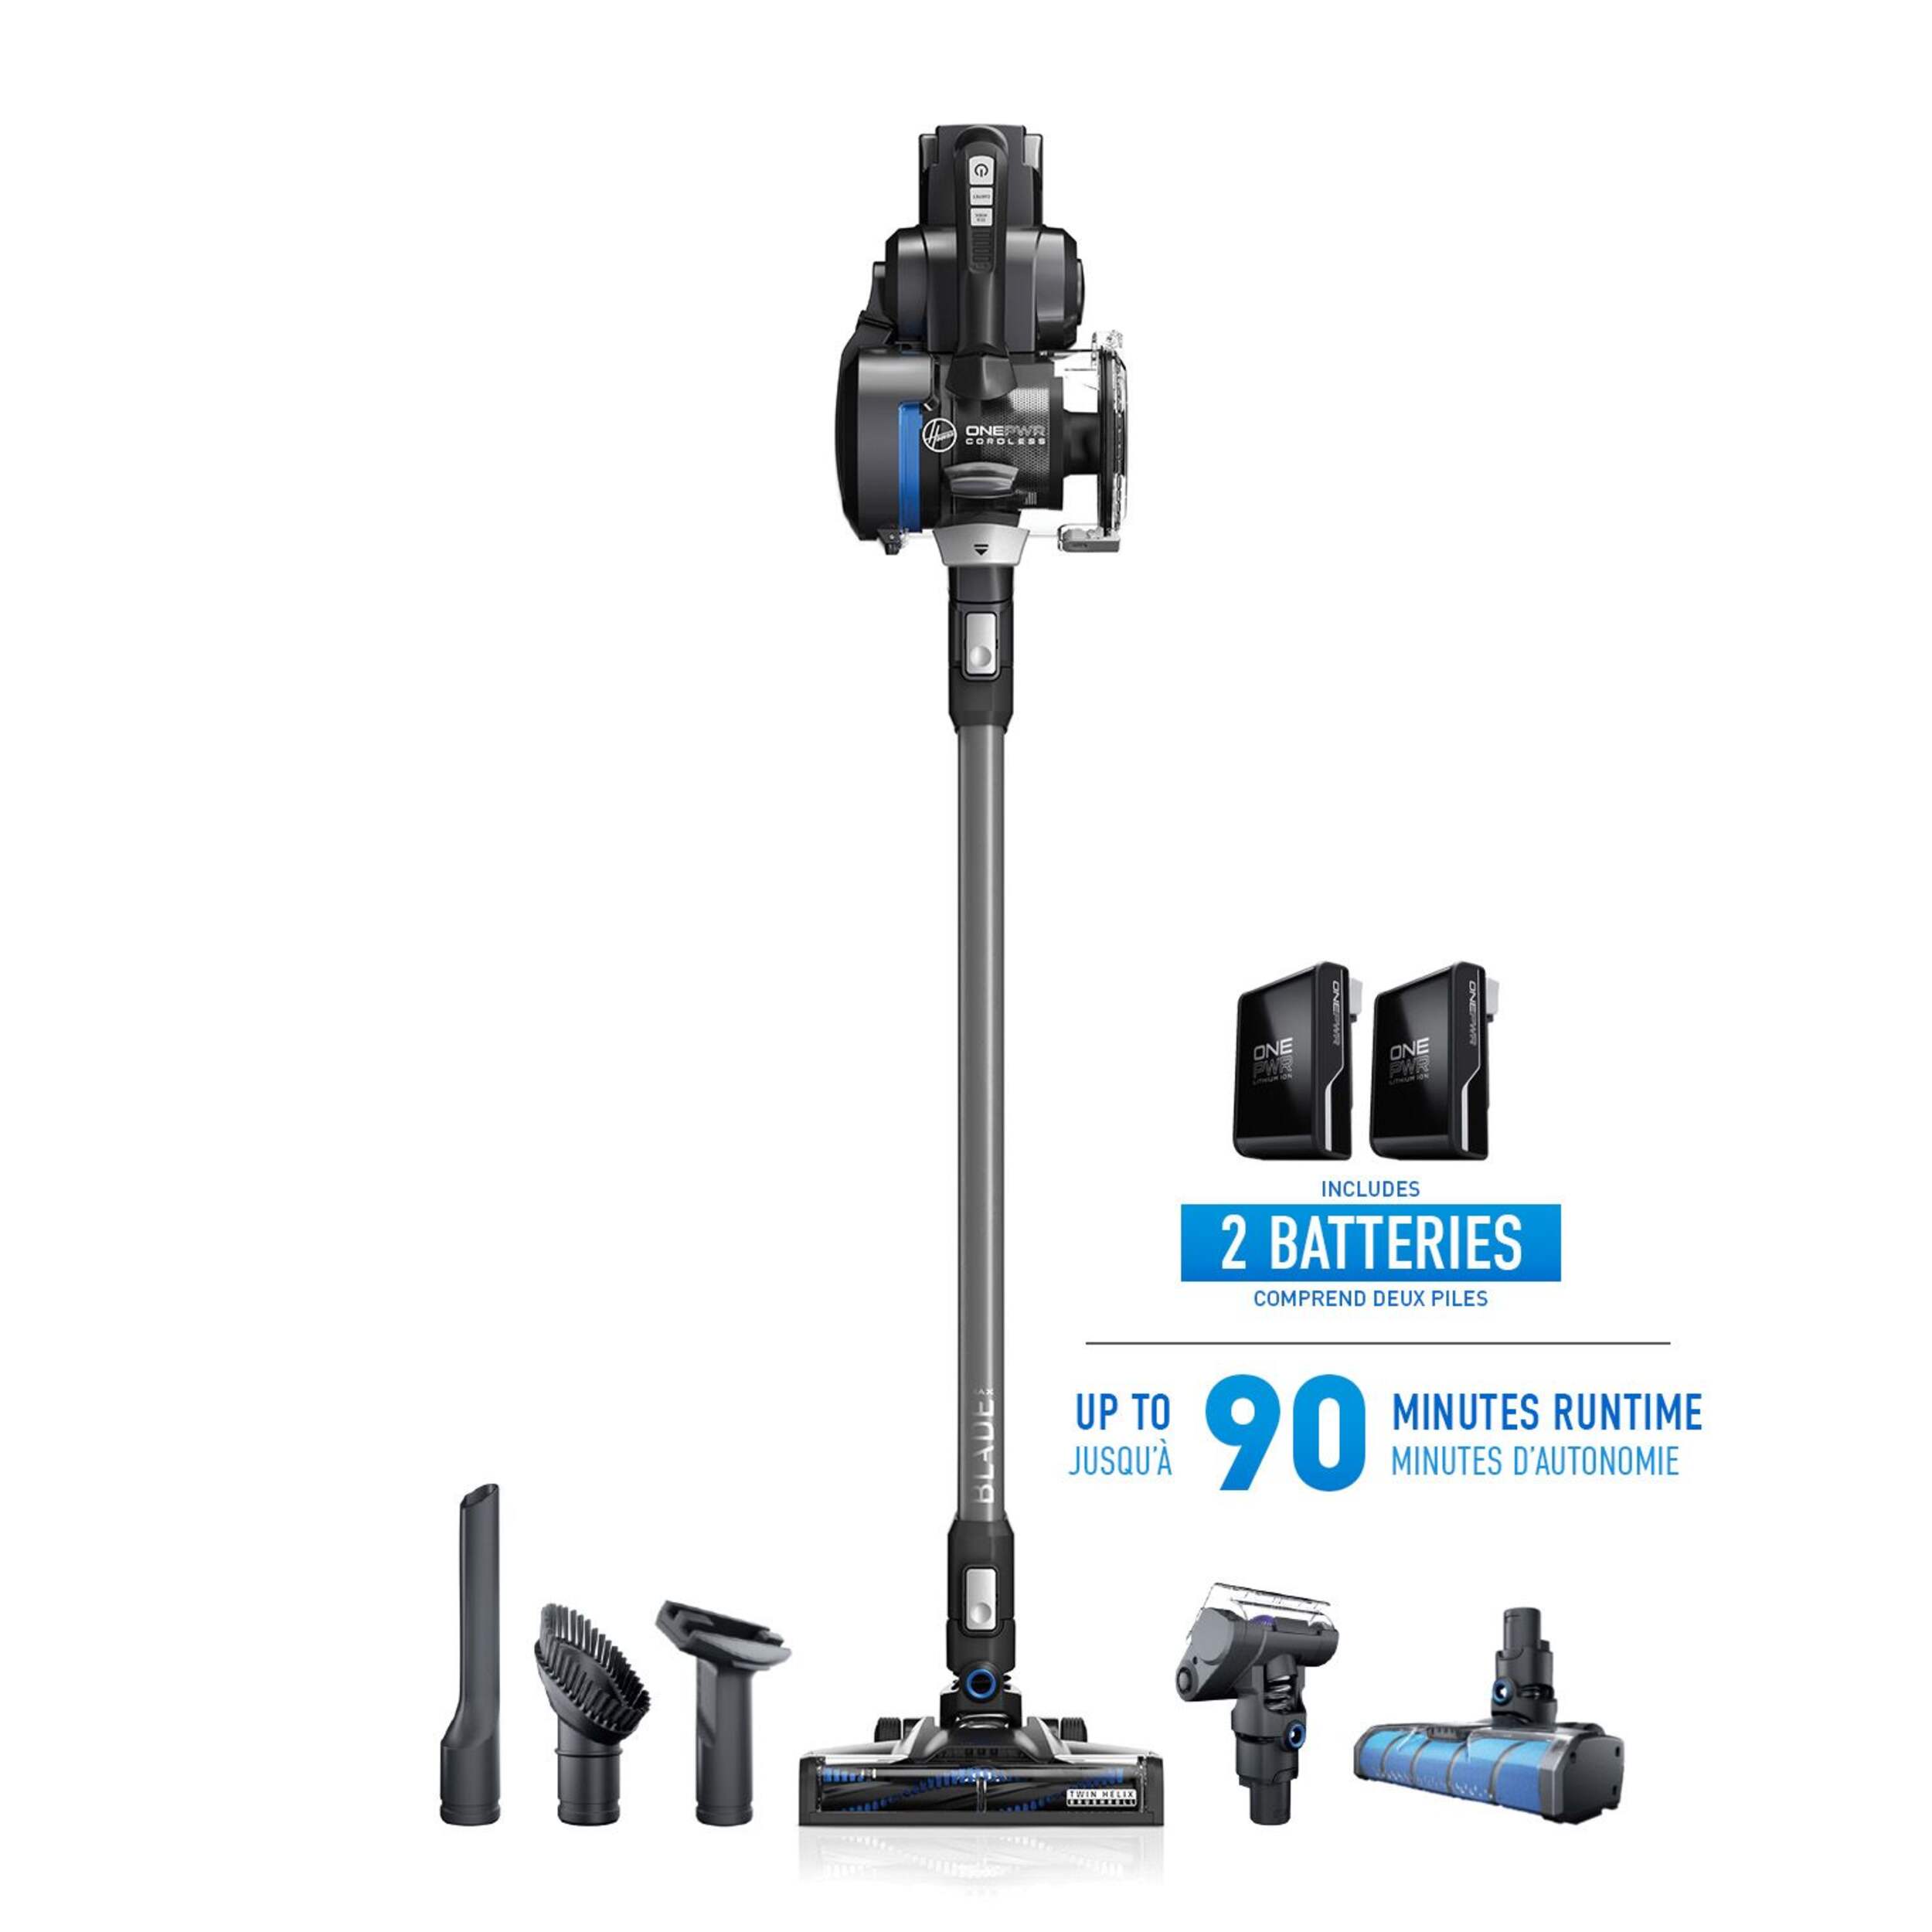 Hoover ONEPWR™ BH53350VDE Blade MAX Lightweight Cordless Vacuum Cleaner, 2 Batteries Included (Refurbished - 90 Days Warranty)